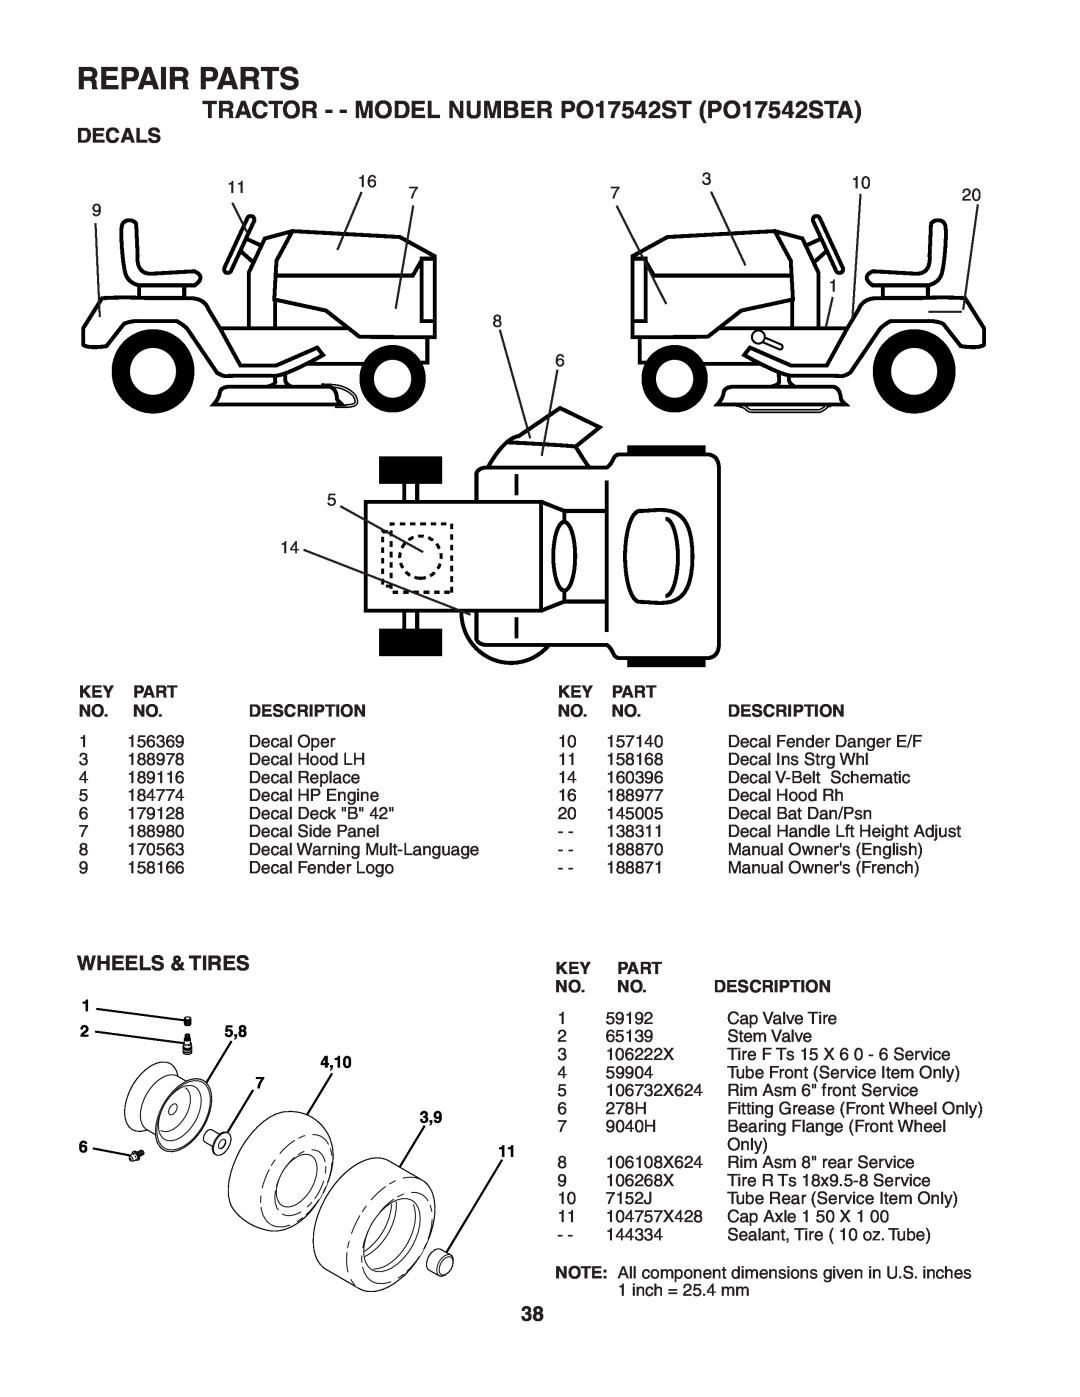 Poulan manual Decals, Wheels & Tires, Repair Parts, TRACTOR - - MODEL NUMBER PO17542ST PO17542STA 